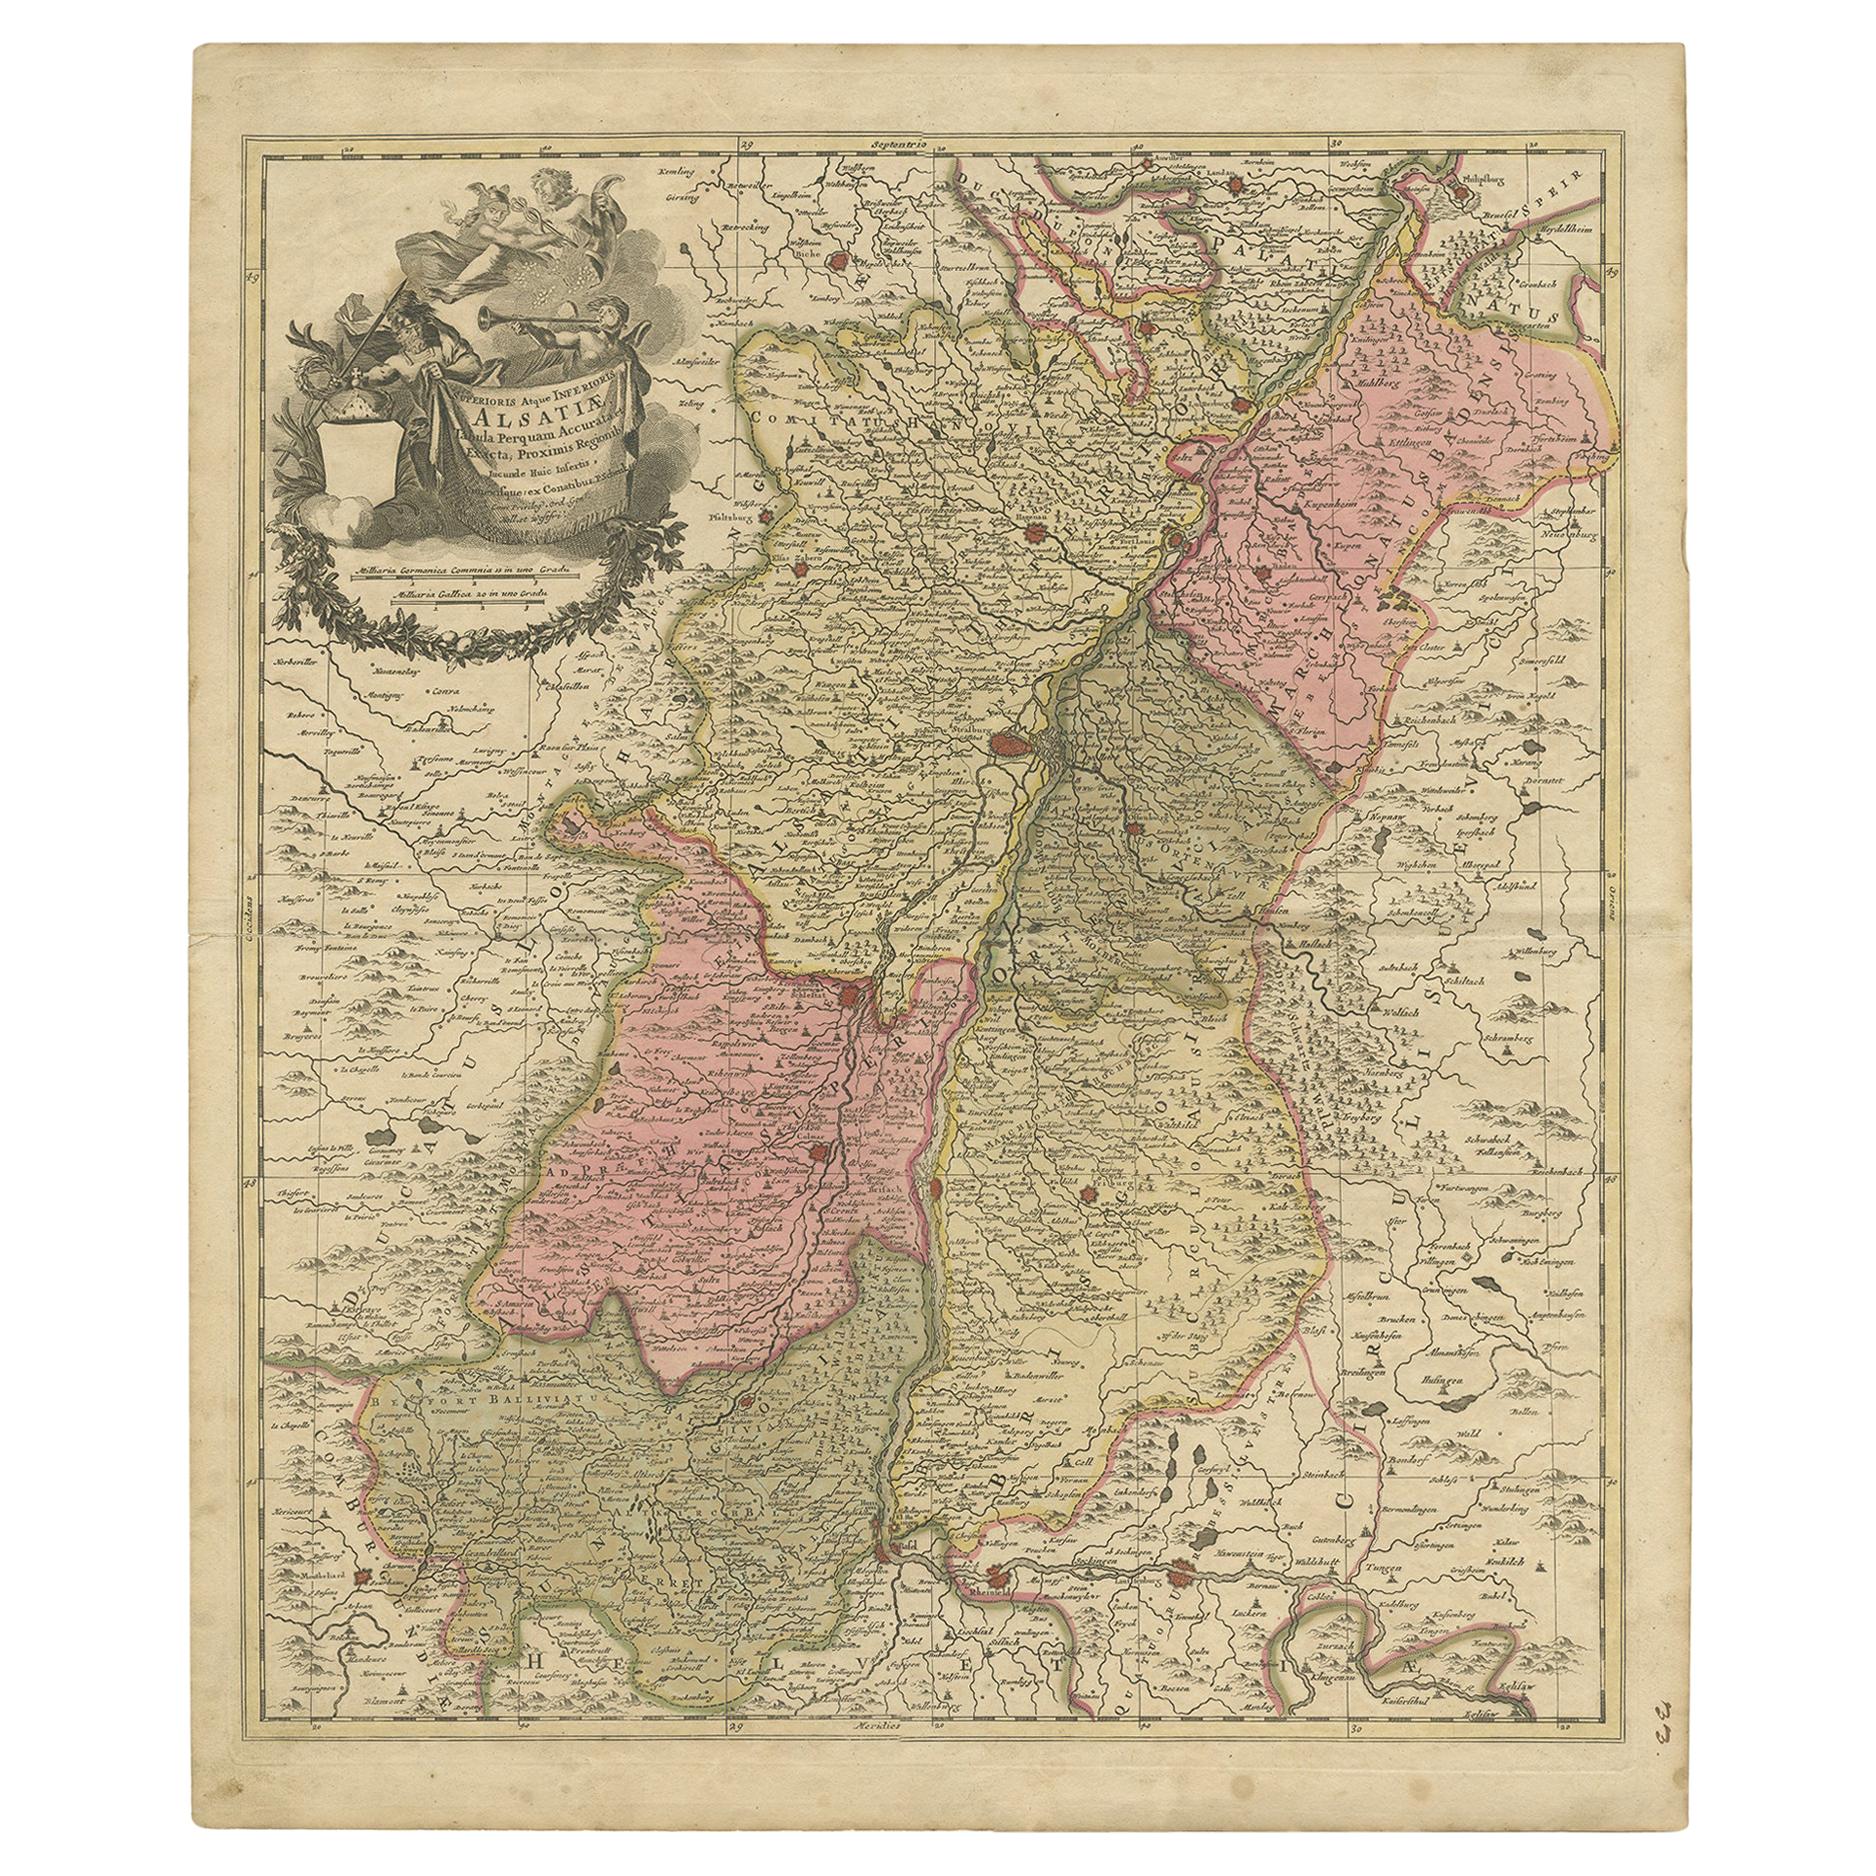 Antique Map of the Alsace Region of France by Schenk 'circa 1700' For Sale